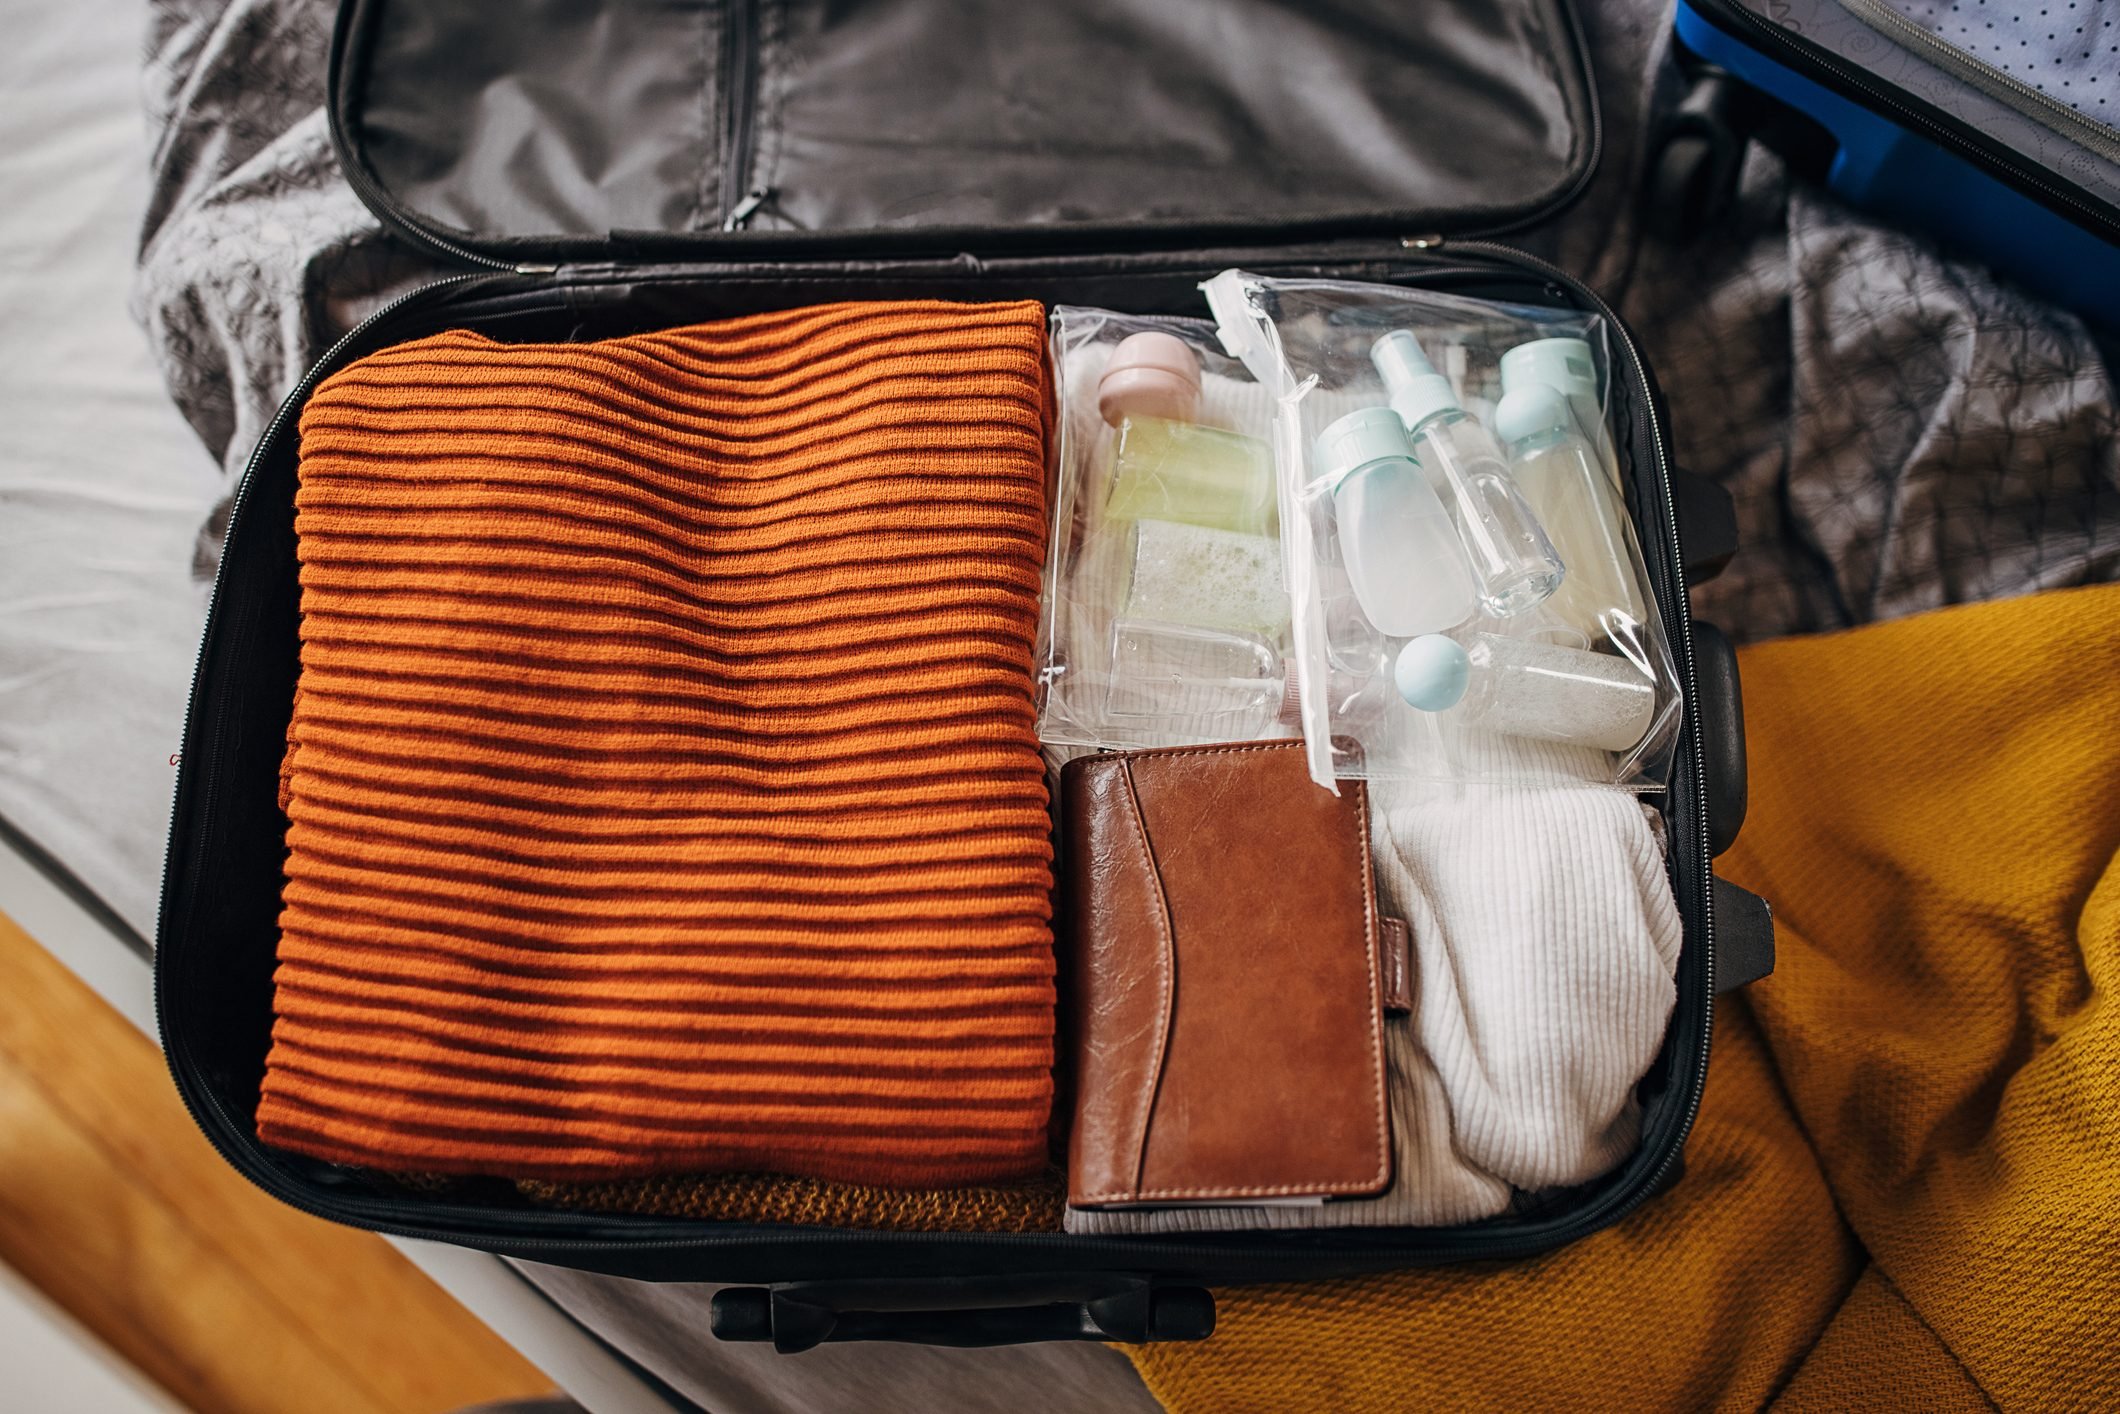 Don't Fly Without These 20 TSA-Approved Items in Your Prepper's Carry-on  Bag